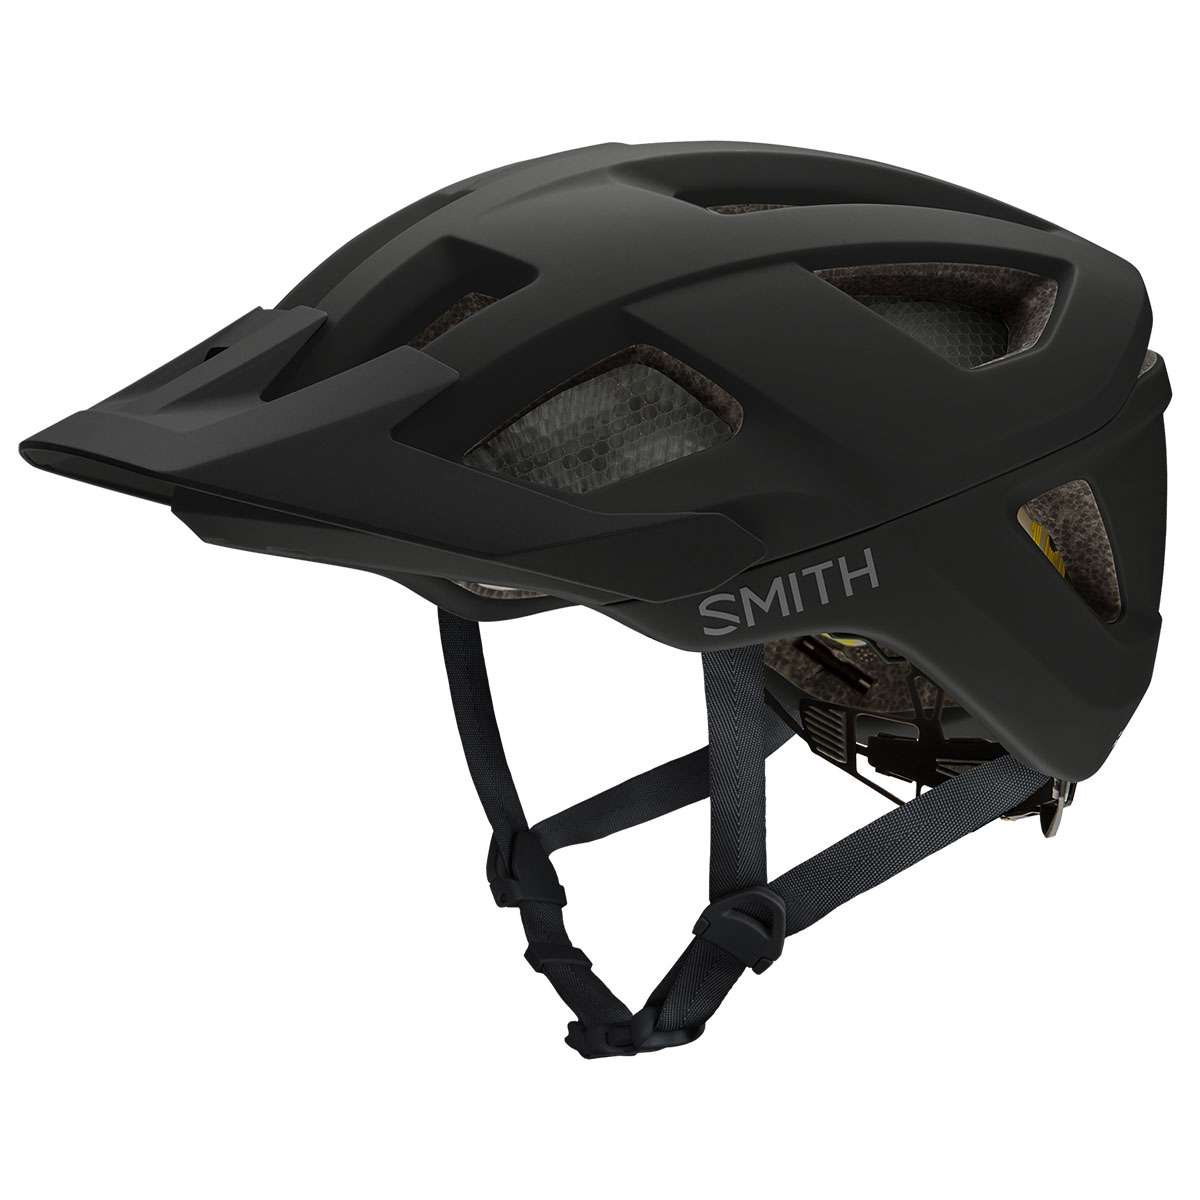 CASQUE SMITH SESSION MIPS NOIR MAT SMALL